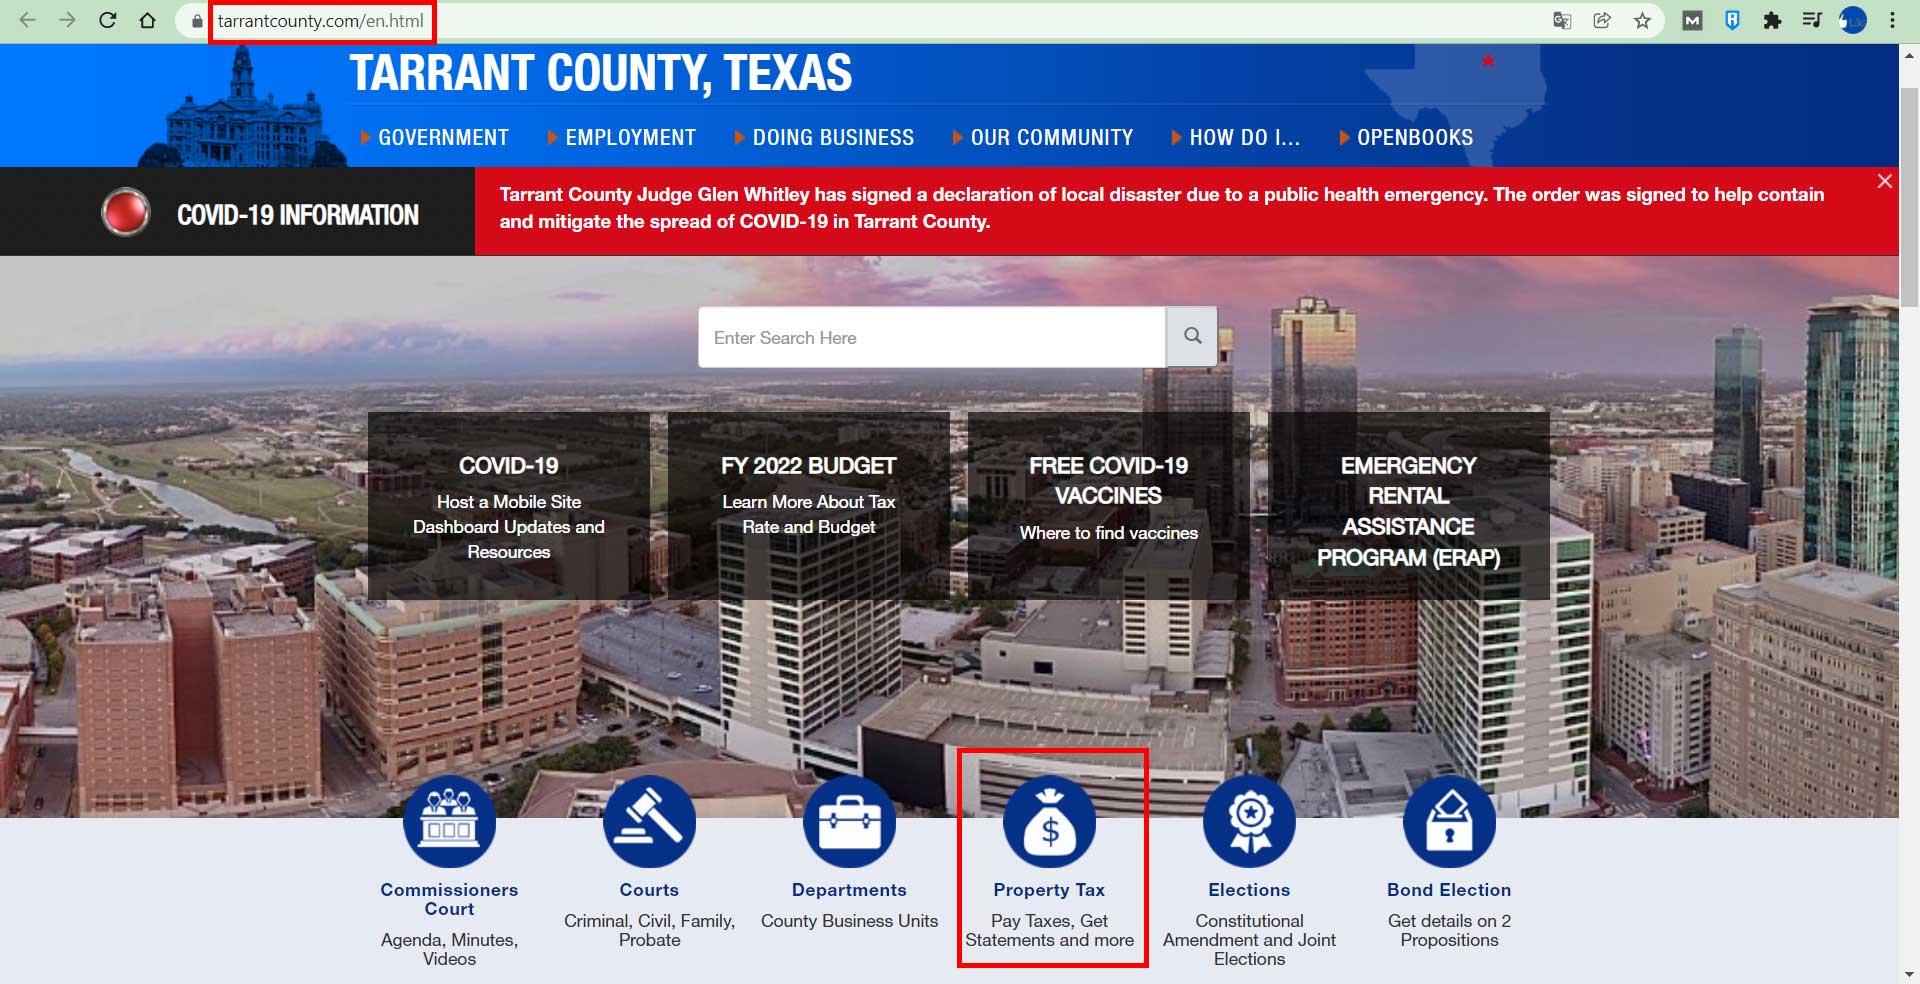 Accessing the Tarrant County Government Portal